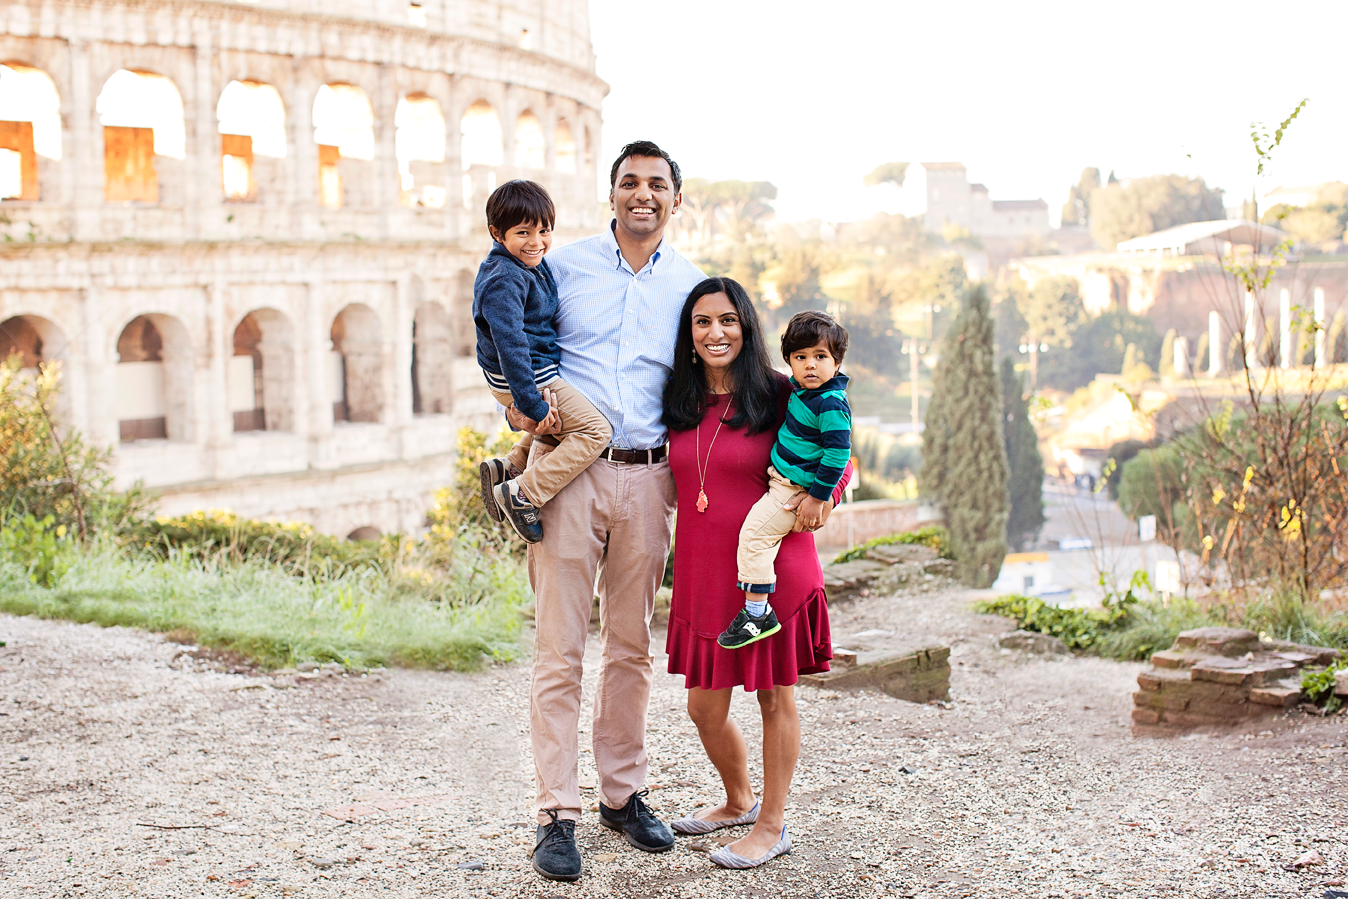 Honeymoon, vacation, family, engagement, maternity, wedding, love story individual and solo photoshoots in Rome, Italy by photographer Tricia Anne Photography | Rome Photographer, vacation, tripadvisor, instagram, fun, married, bride, groom, love, story, photography, session, photoshoot, wedding photographer, mywed, vacation photographer, engagement photo, honeymoon photoshoot, rome honeymoon, rome wedding, elopement in Rome, honeymoon photographer rome, Family Photo shoot Rome, Rome Family Photography, Rome Family Photographer, Vatican Photo shoot, Vatican Photography, Colosseum photo shoot, Rome doors, Rome Family Photoshoot